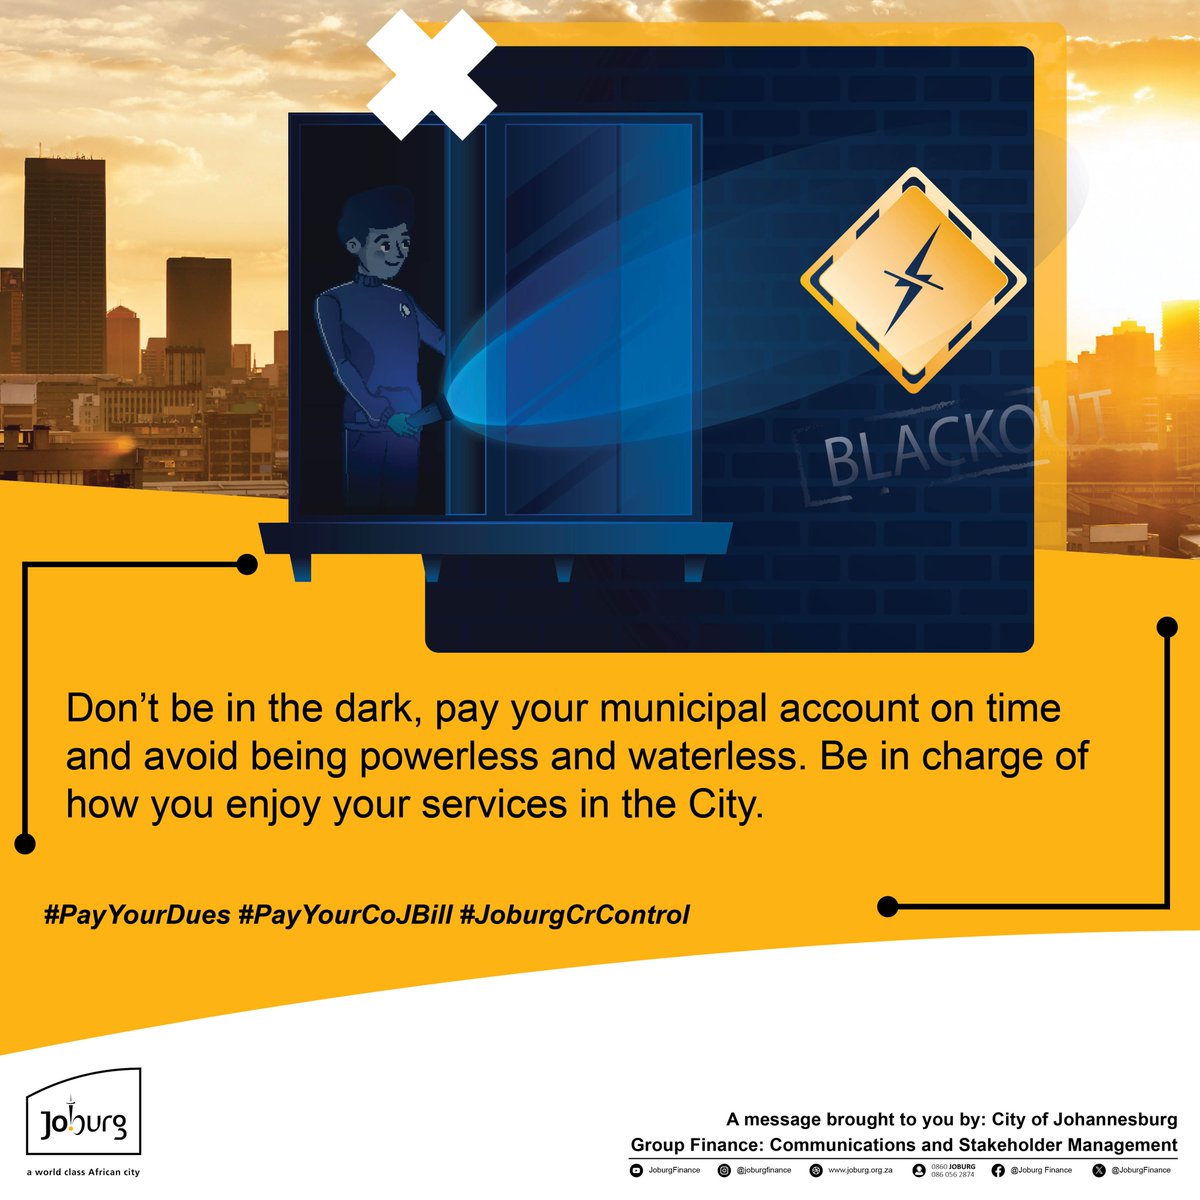 Don't be in the dark, pay your municipal account on time and avoid being powerless and waterless. Be in charge of how you enjoy your services in the City. ^KS 
@CityofJoburgZA @JHBWater @CityPowerJhb
 #PayYourDues #PayYourCOJBill #JoburgCrControl